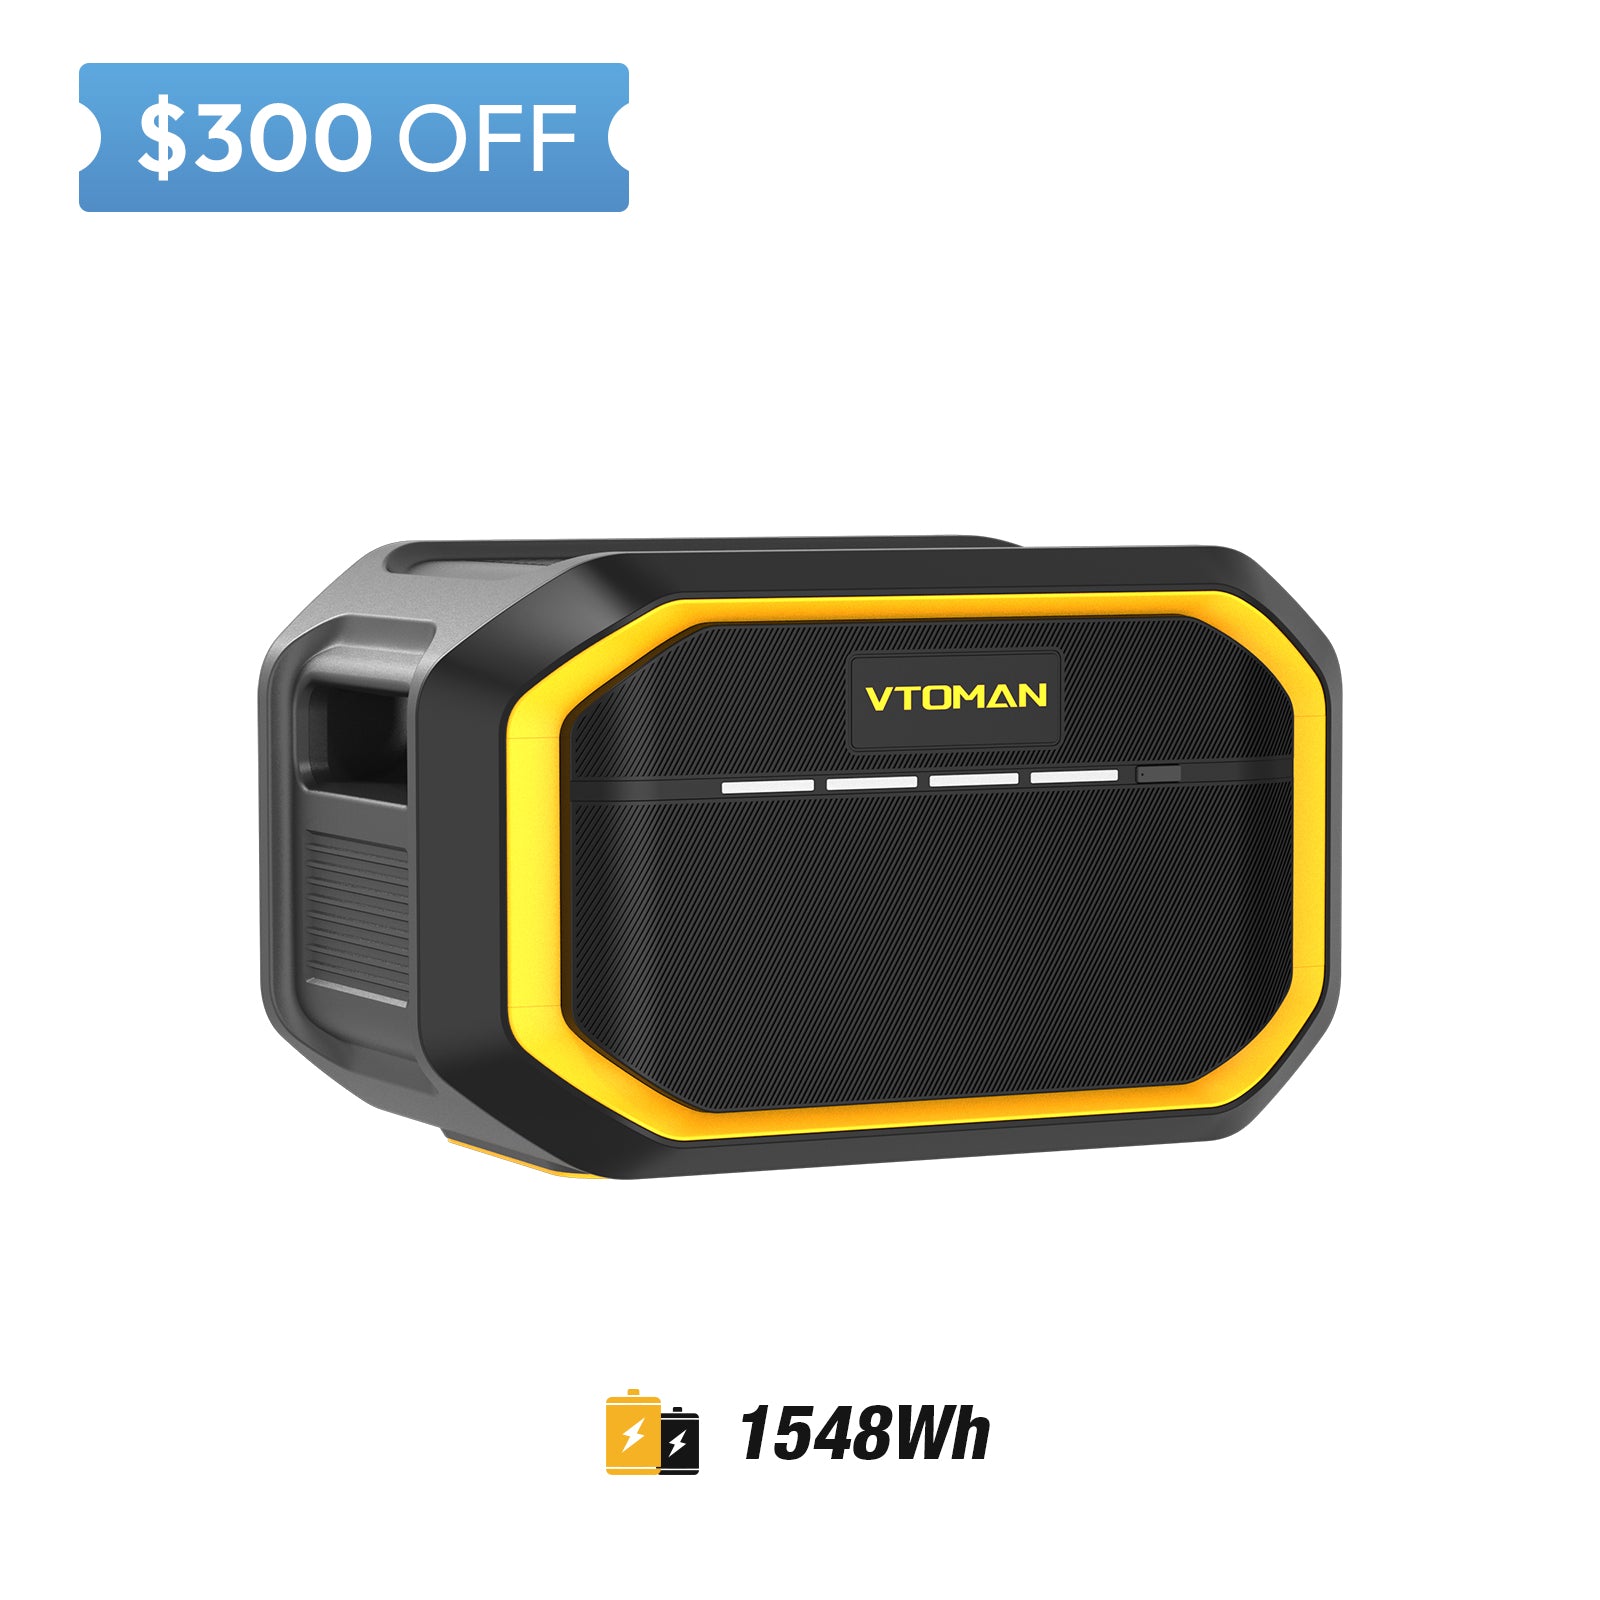 1548wh extra battery save $300